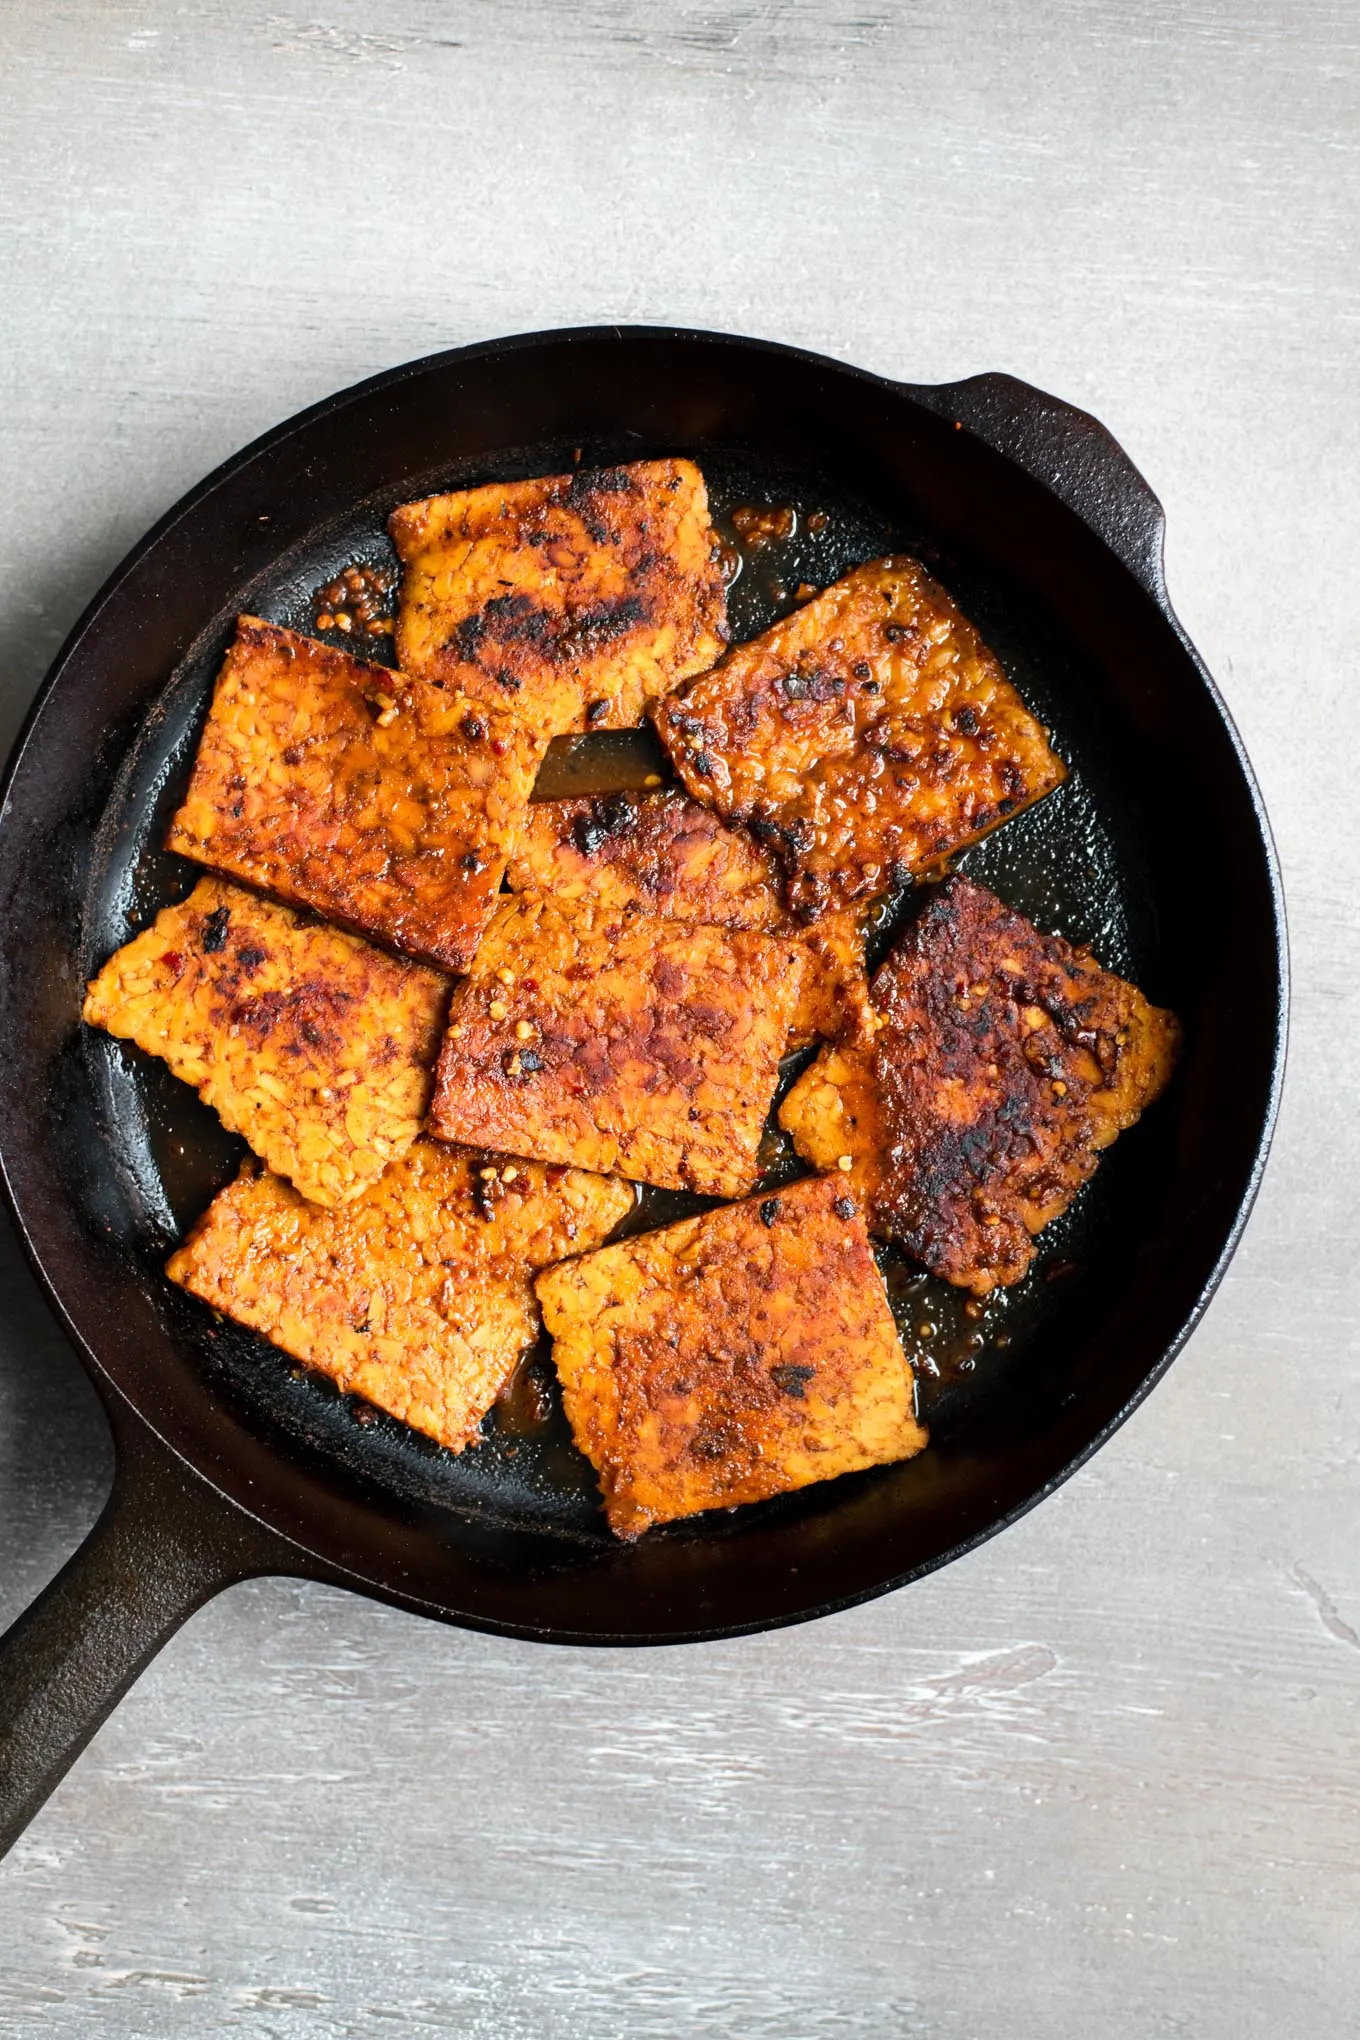 The corned tempeh in the skillet after the marinade is added